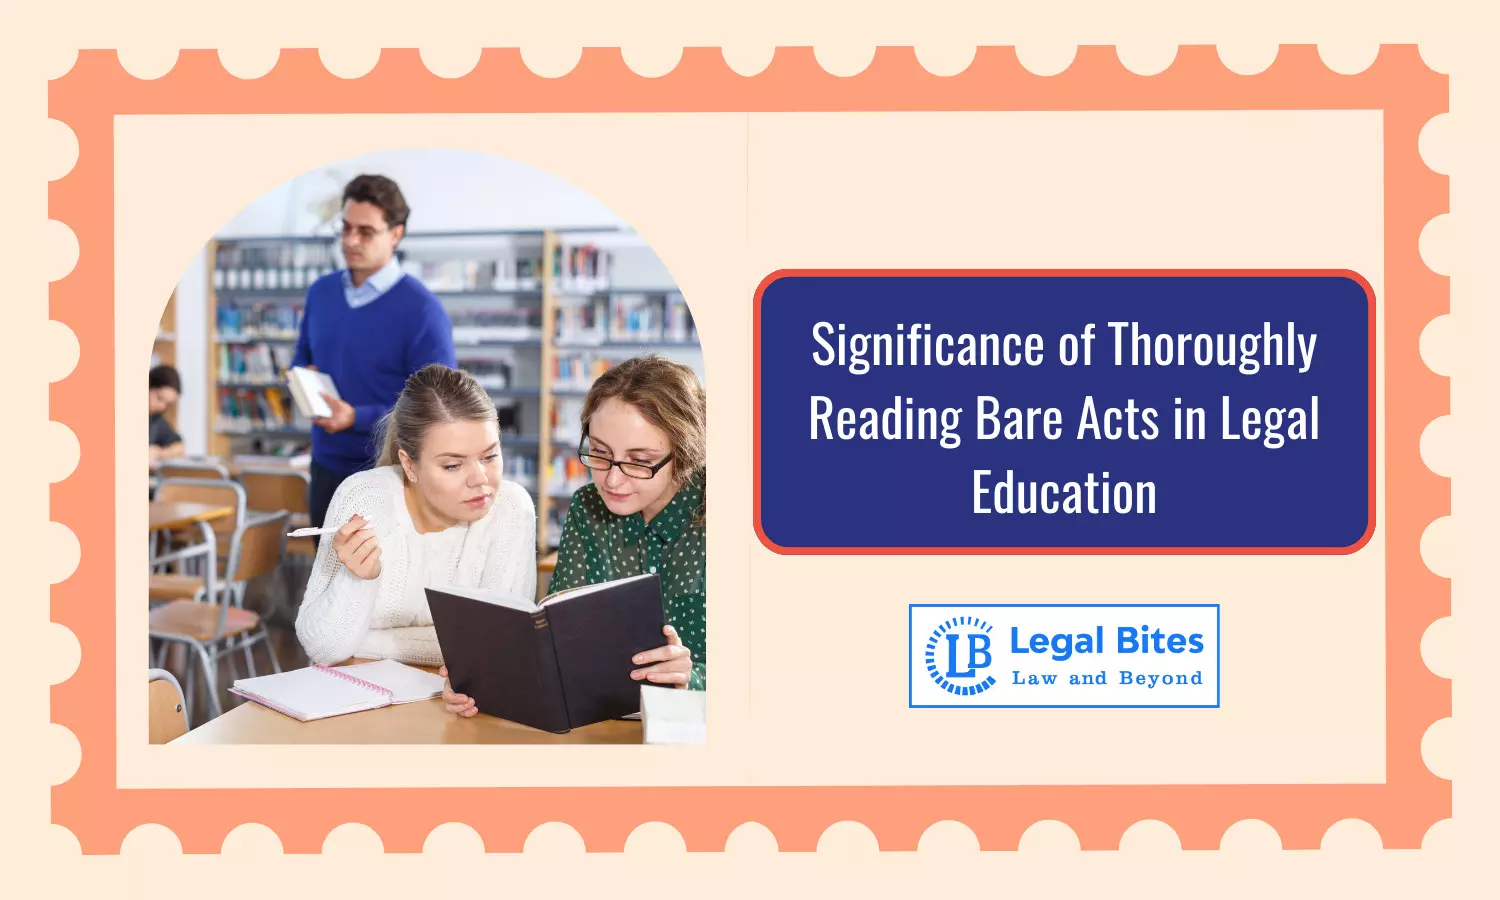 Significance of Thoroughly Reading Bare Acts in Legal Education